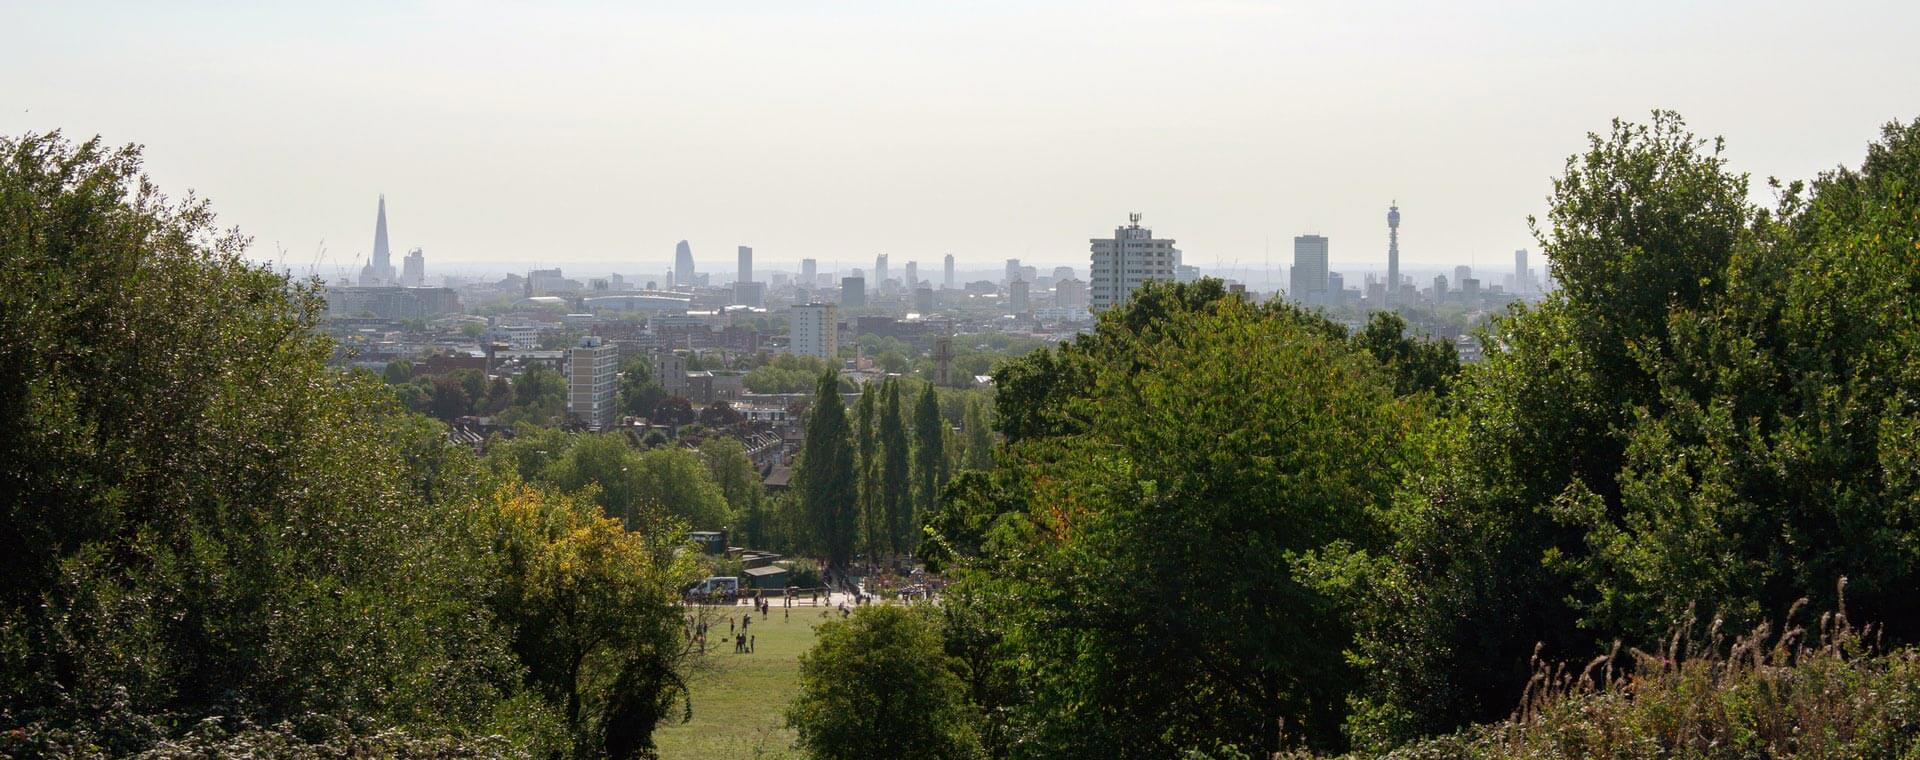 Hampstead park in North London